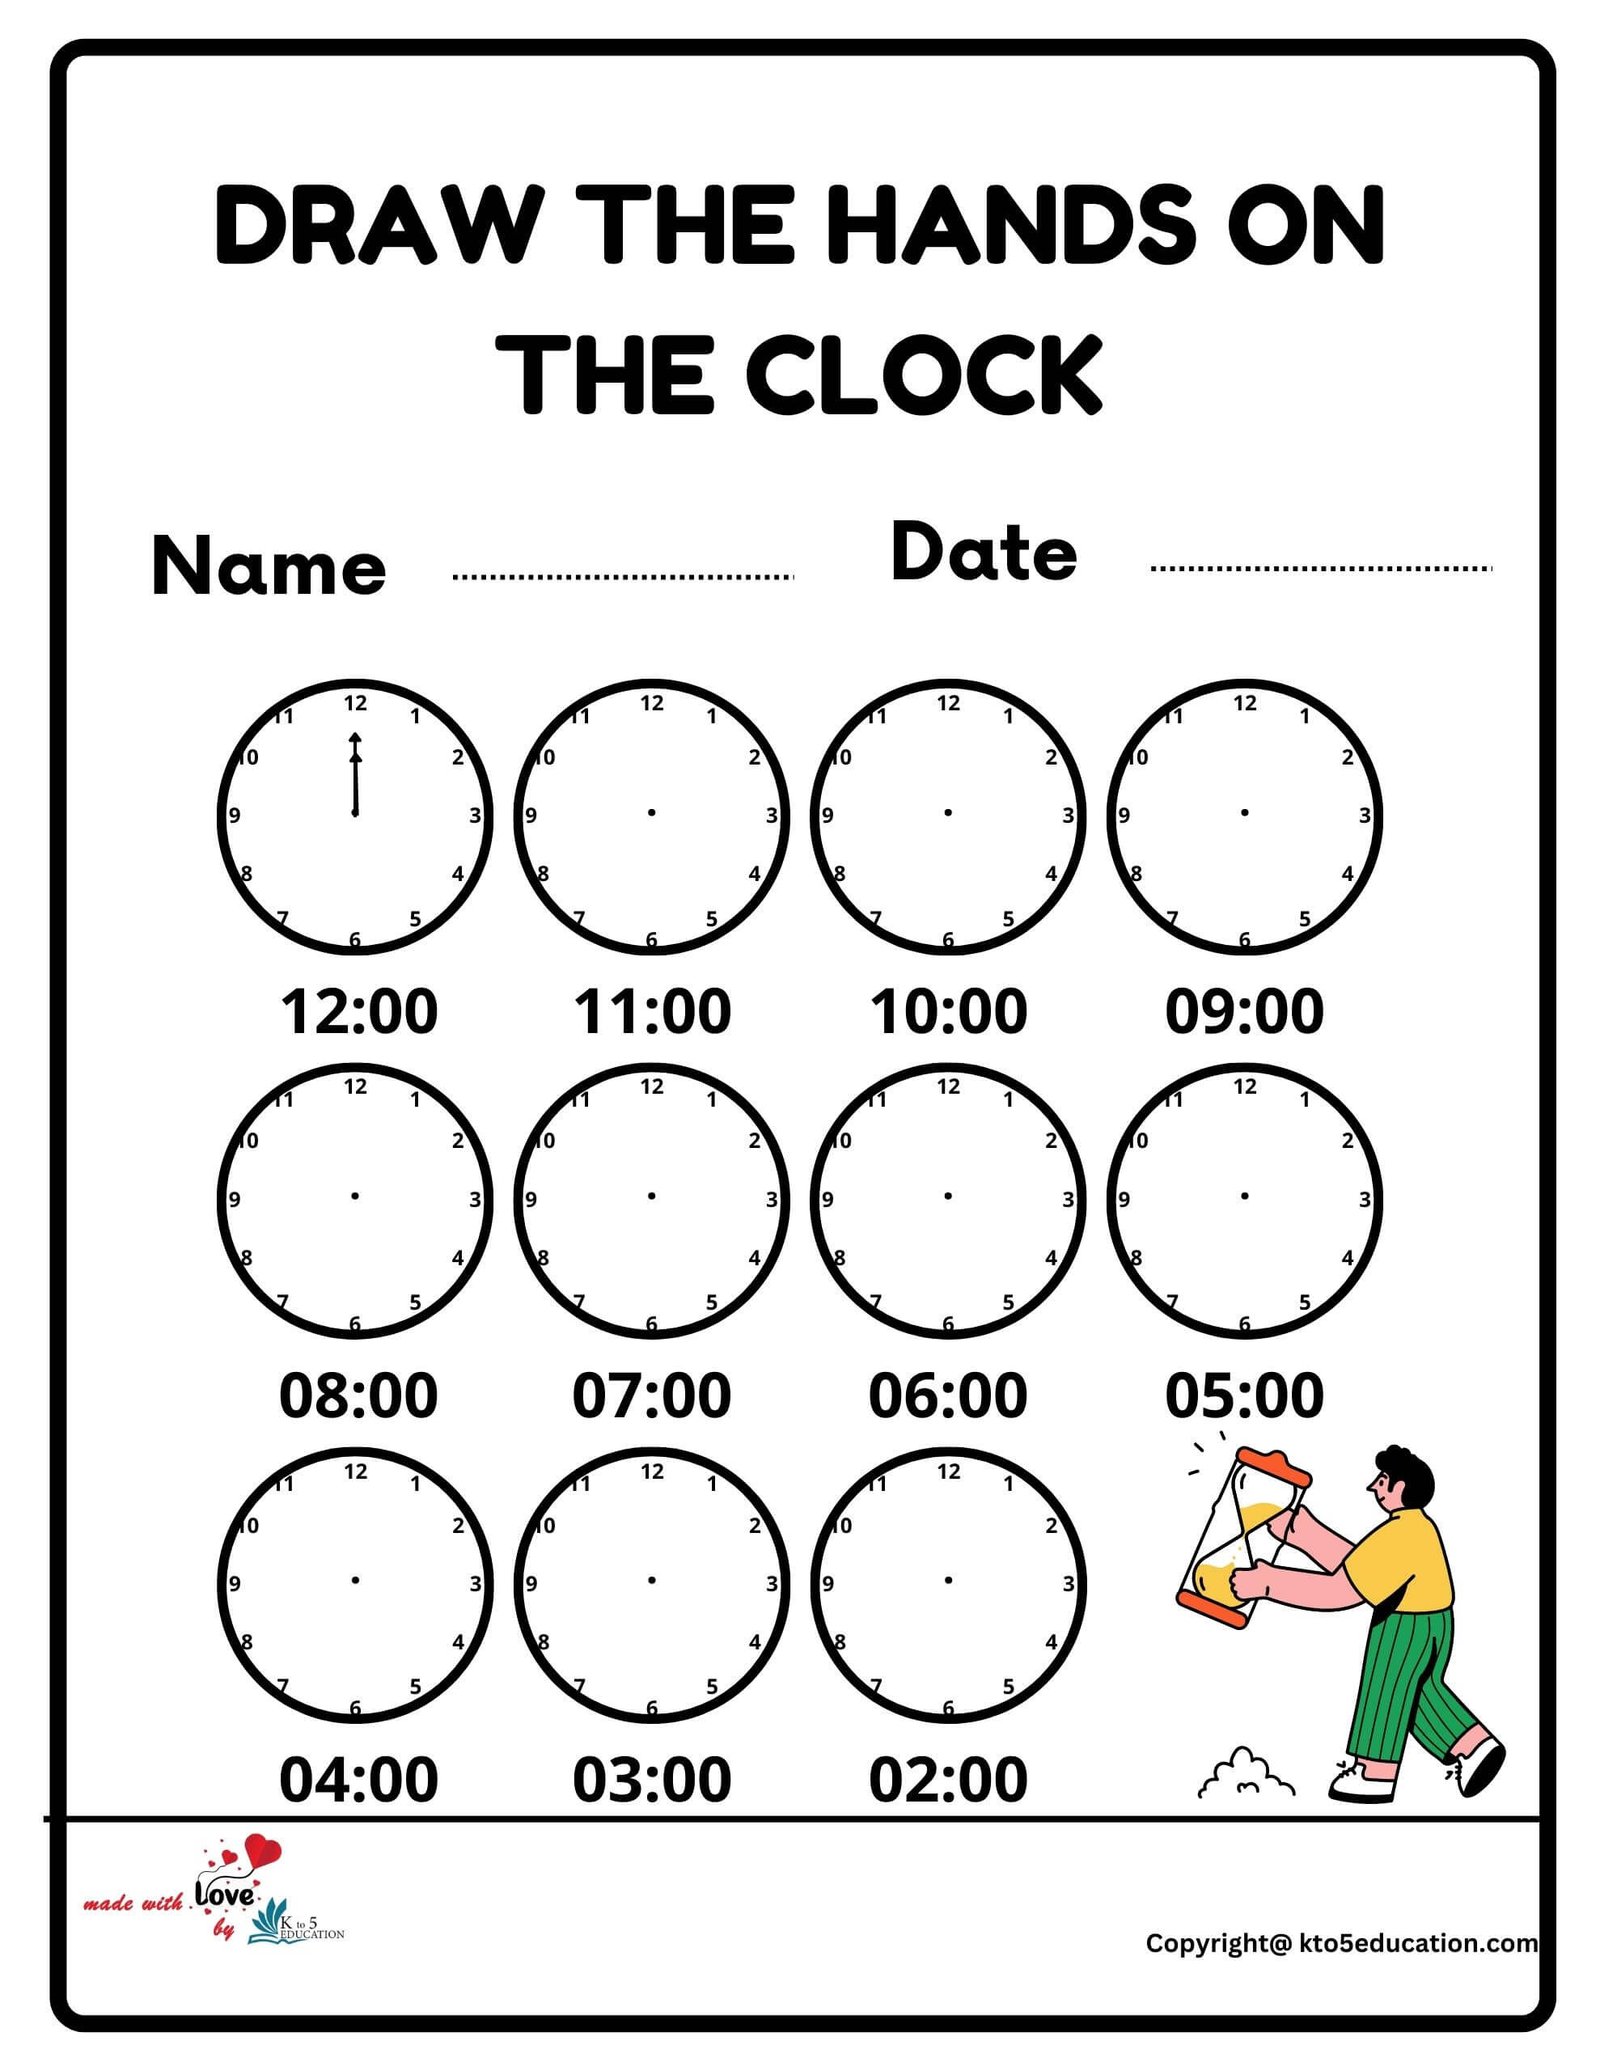 Draw The Hands On The Clock Worksheet 2